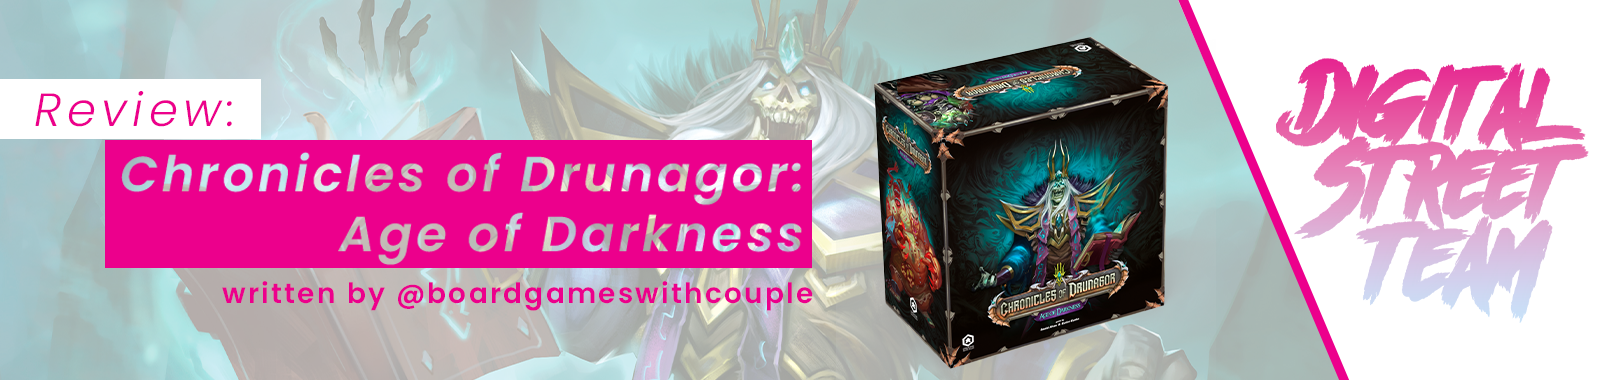 Review: Chronicles of Drunagor: Age of Darkness - written by @boardgameswithcouple